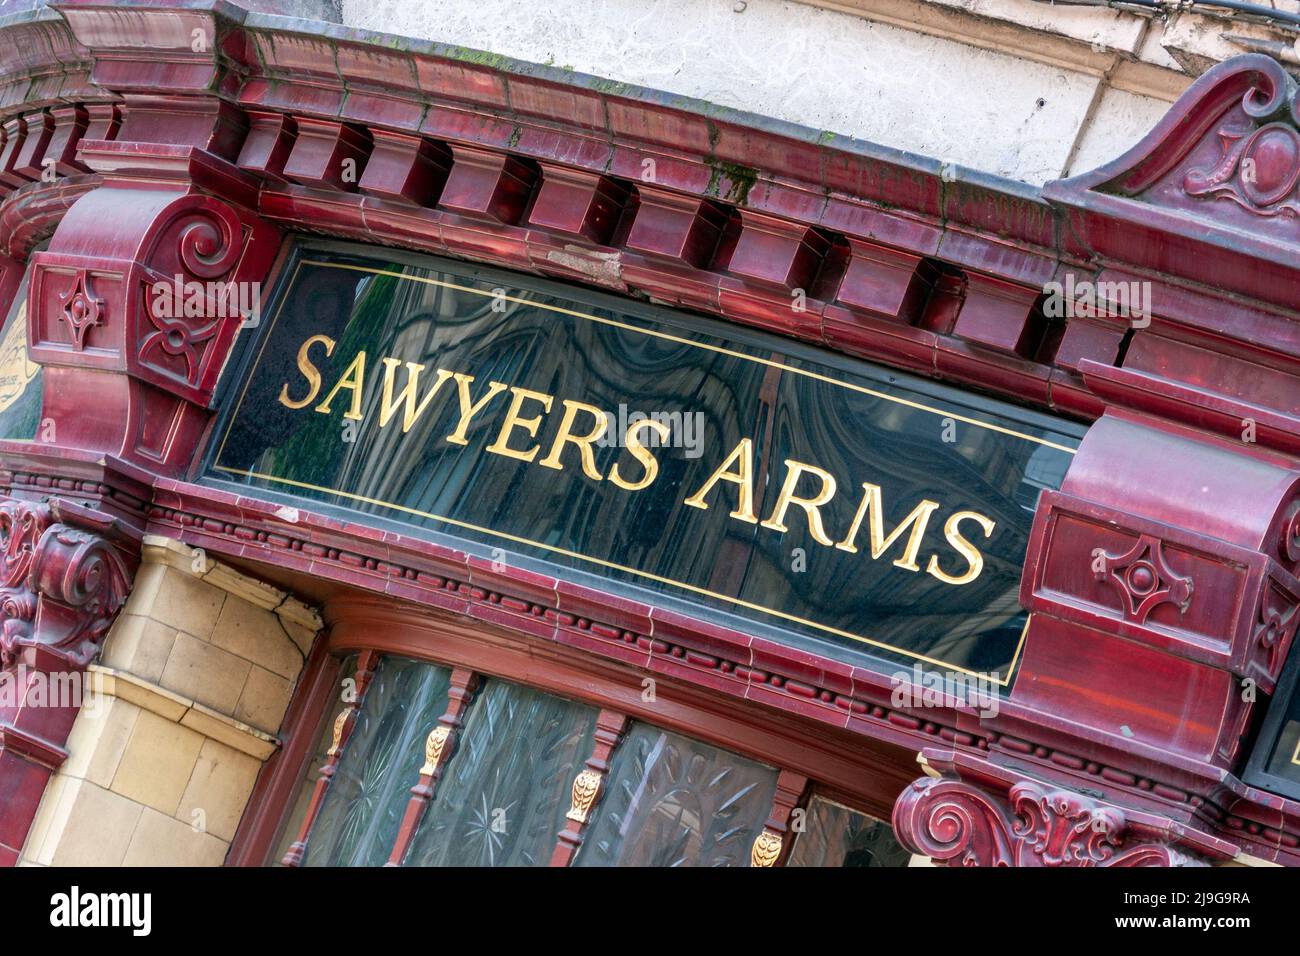 Sawyer's Arms, Manchester Foto Stock